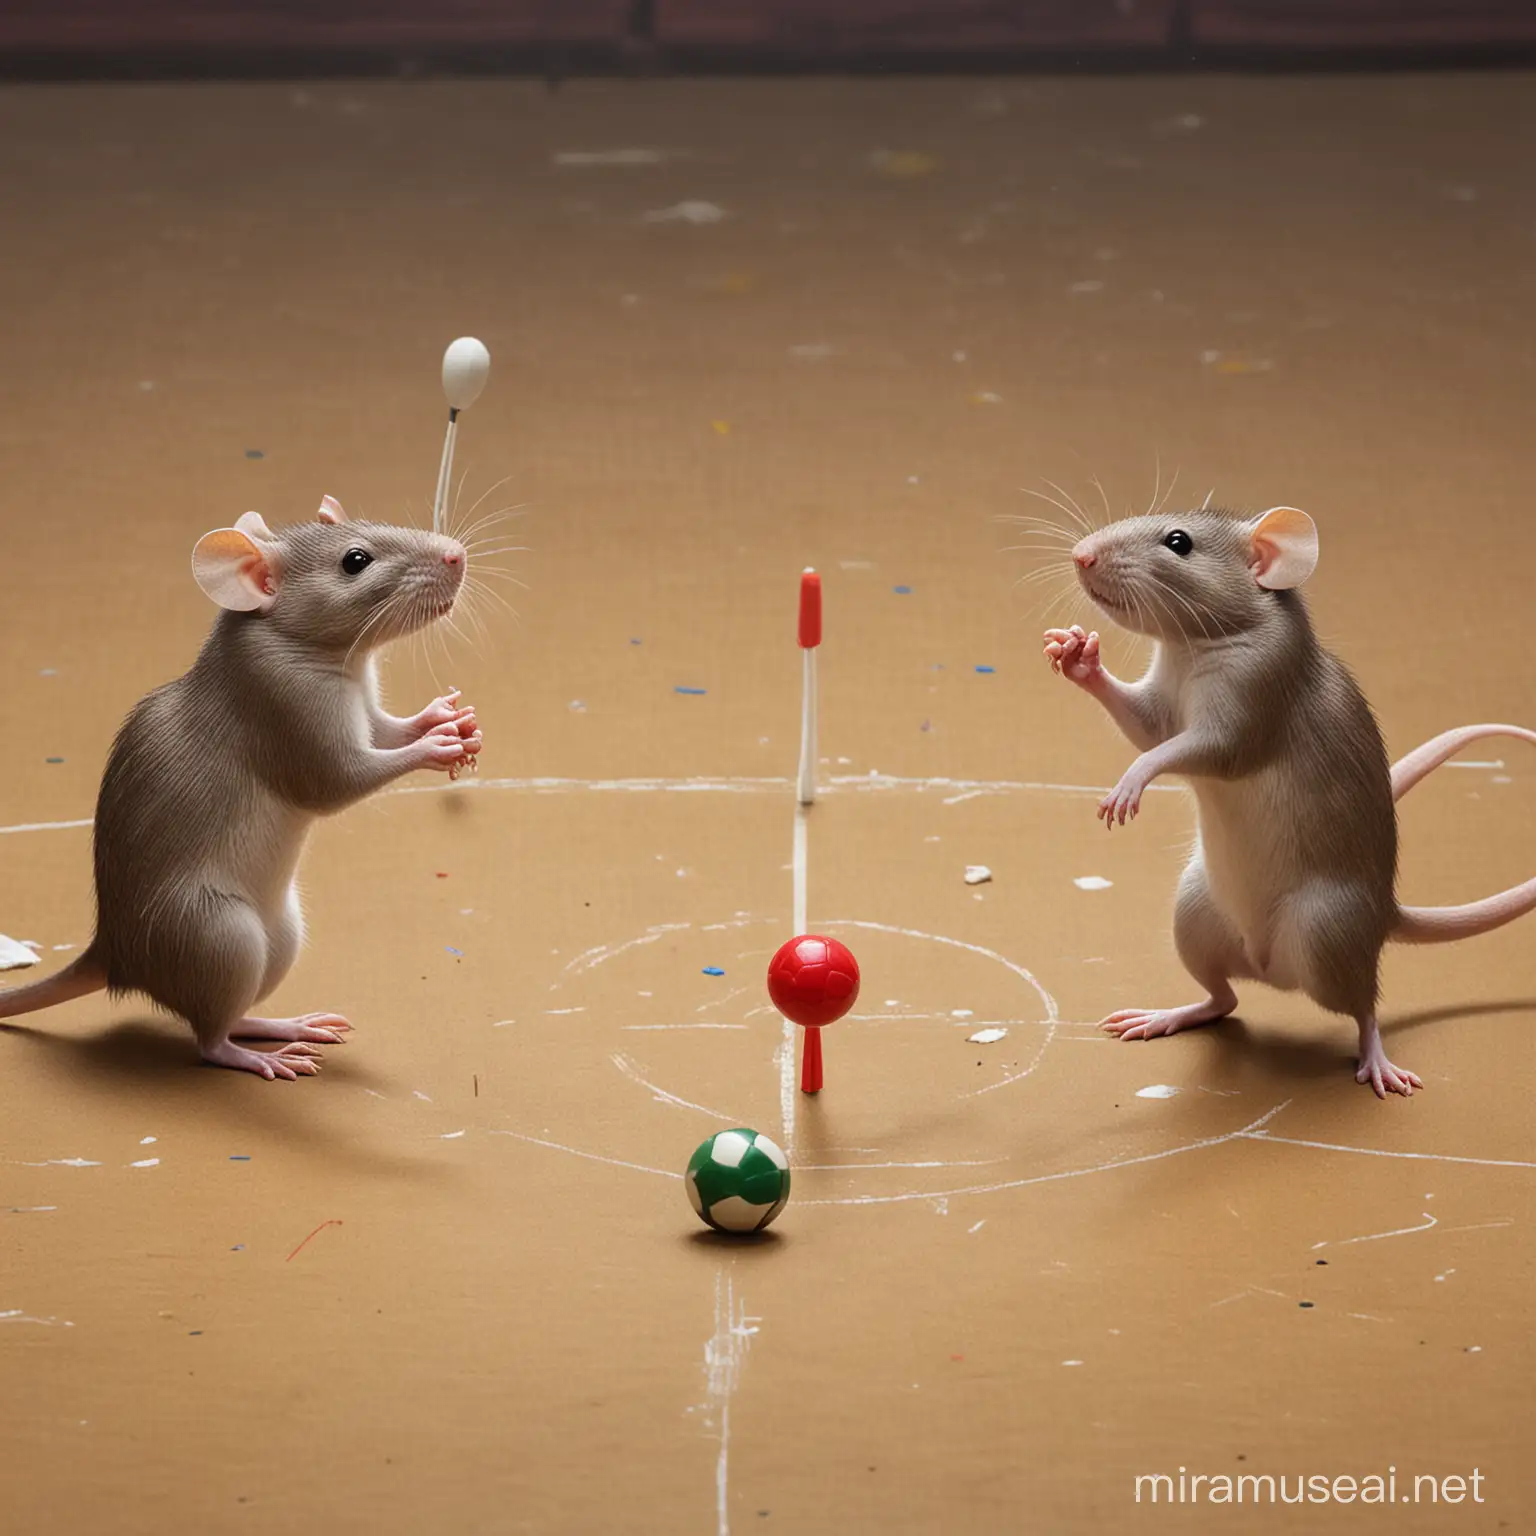 Whimsical Scene of Rats Playing Football and Darts in a Playful Setting